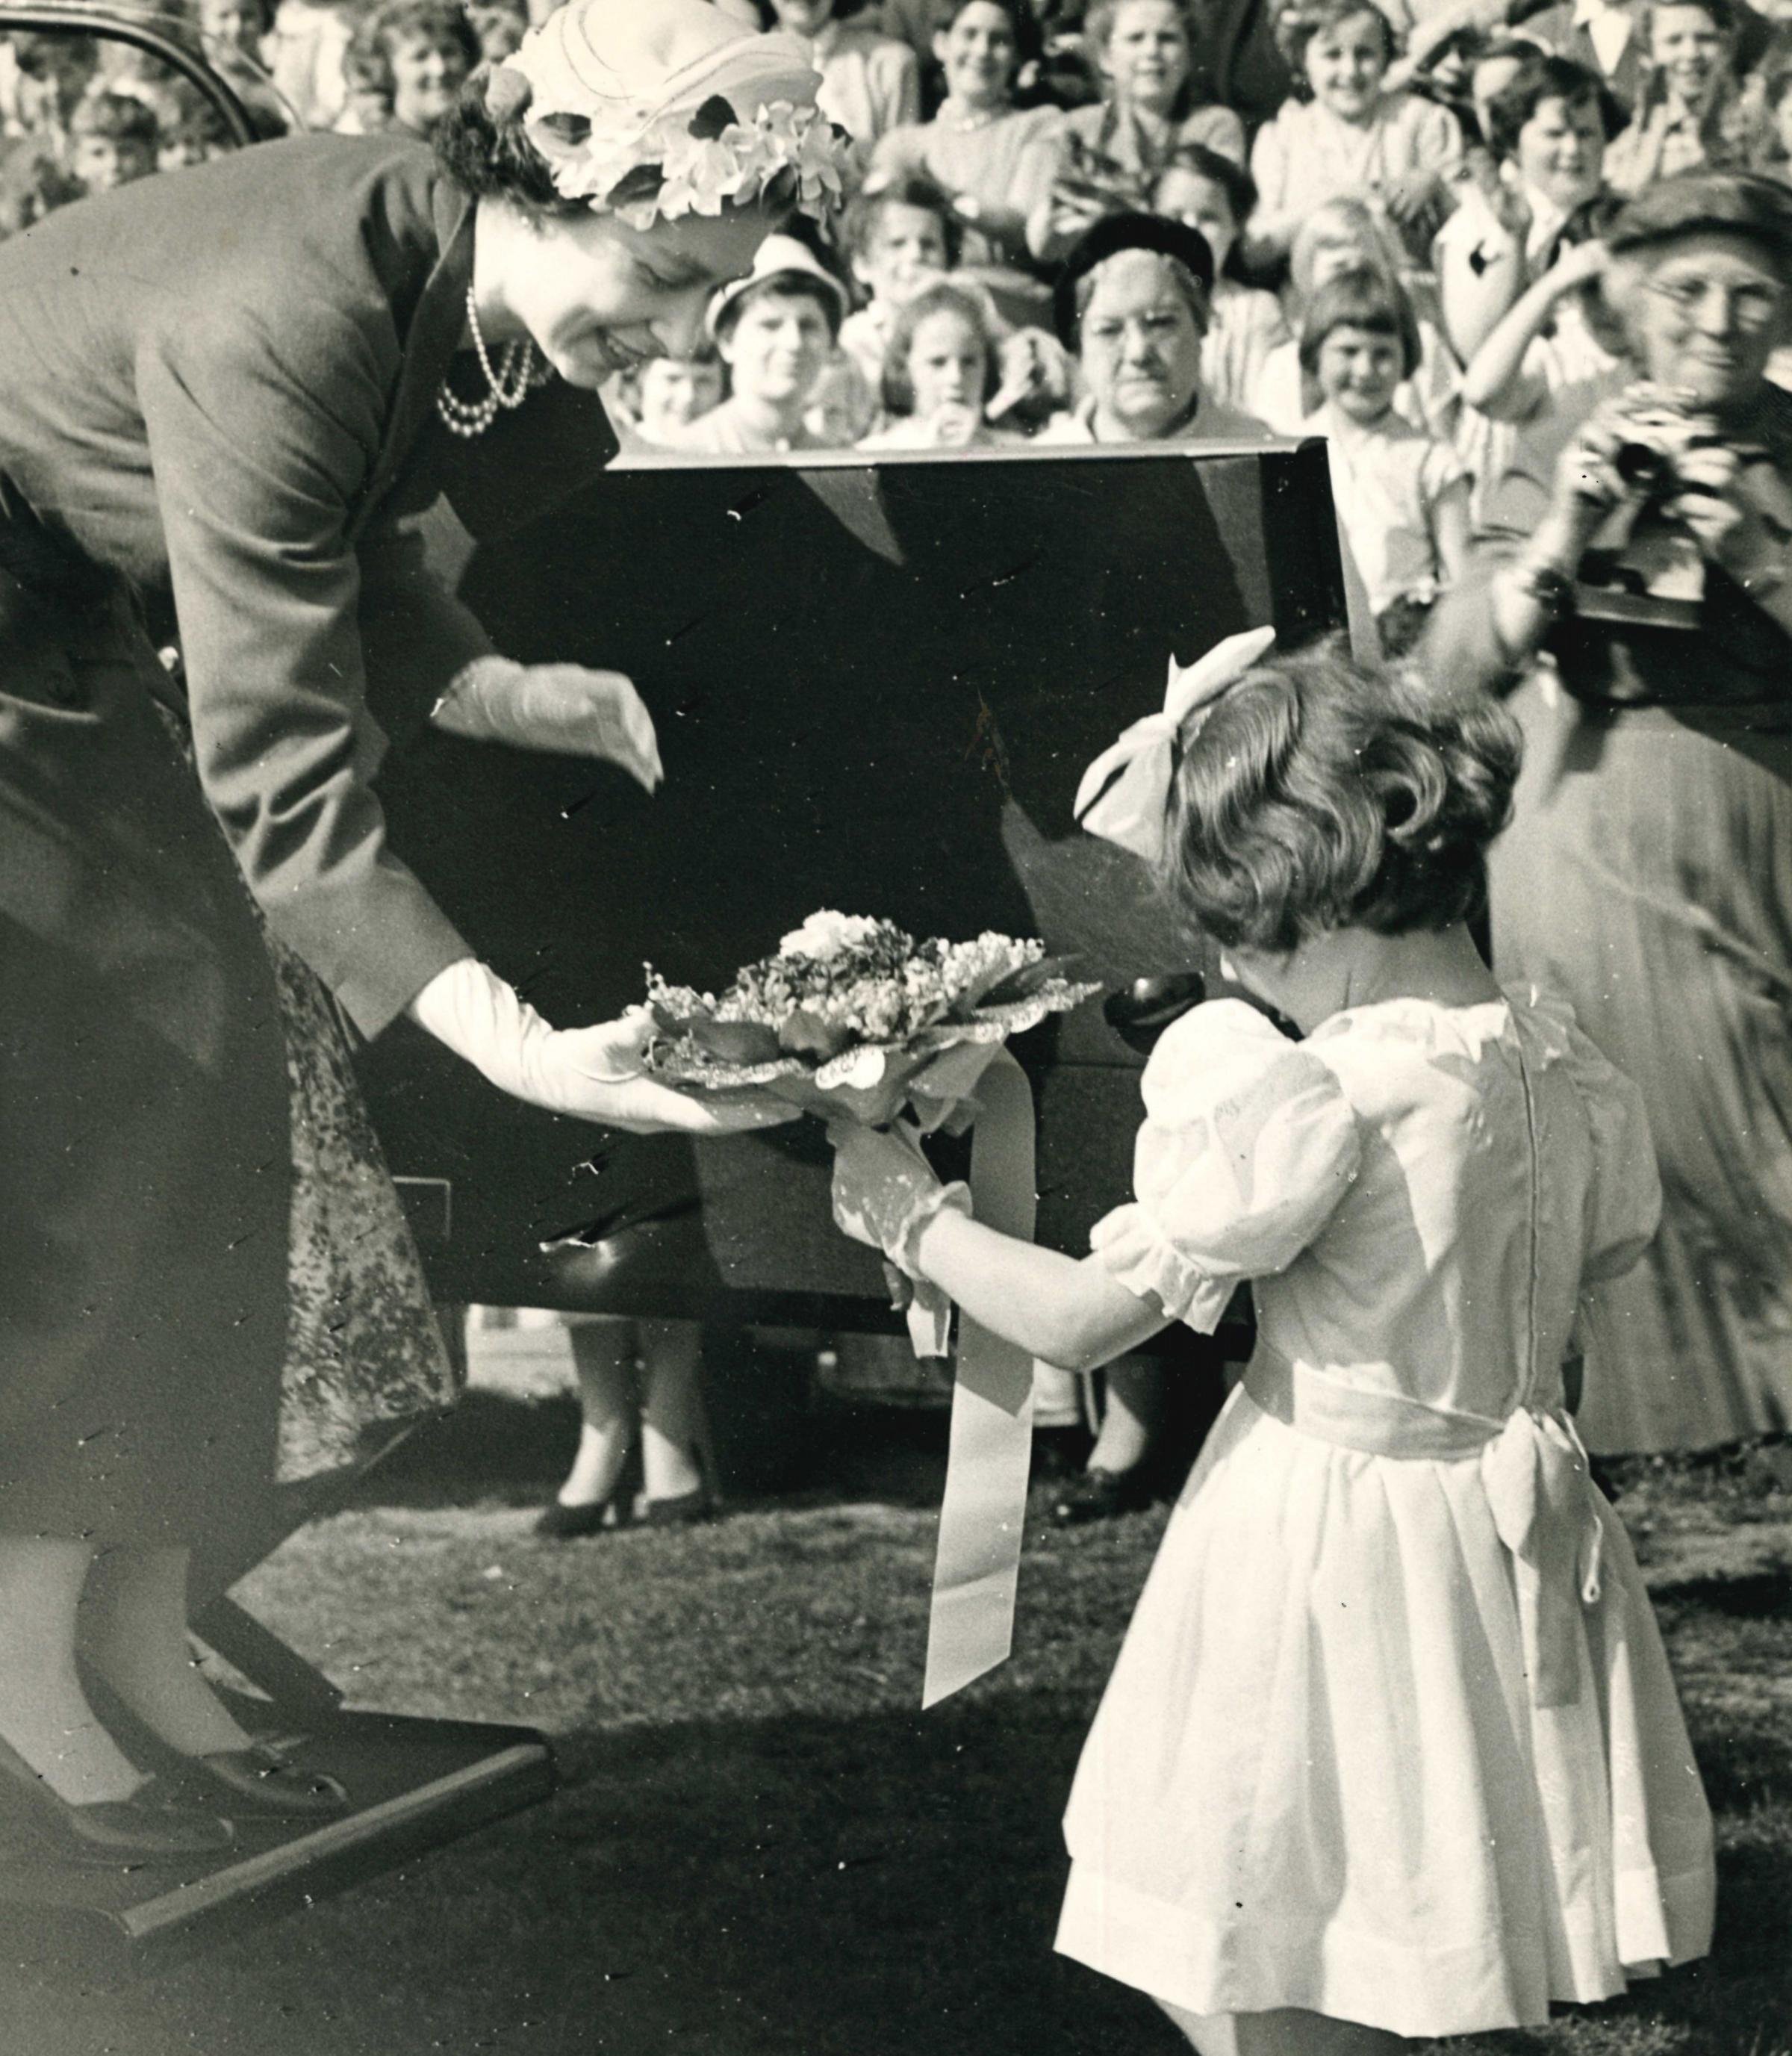 The Queen takes a gift during her visit in 1957